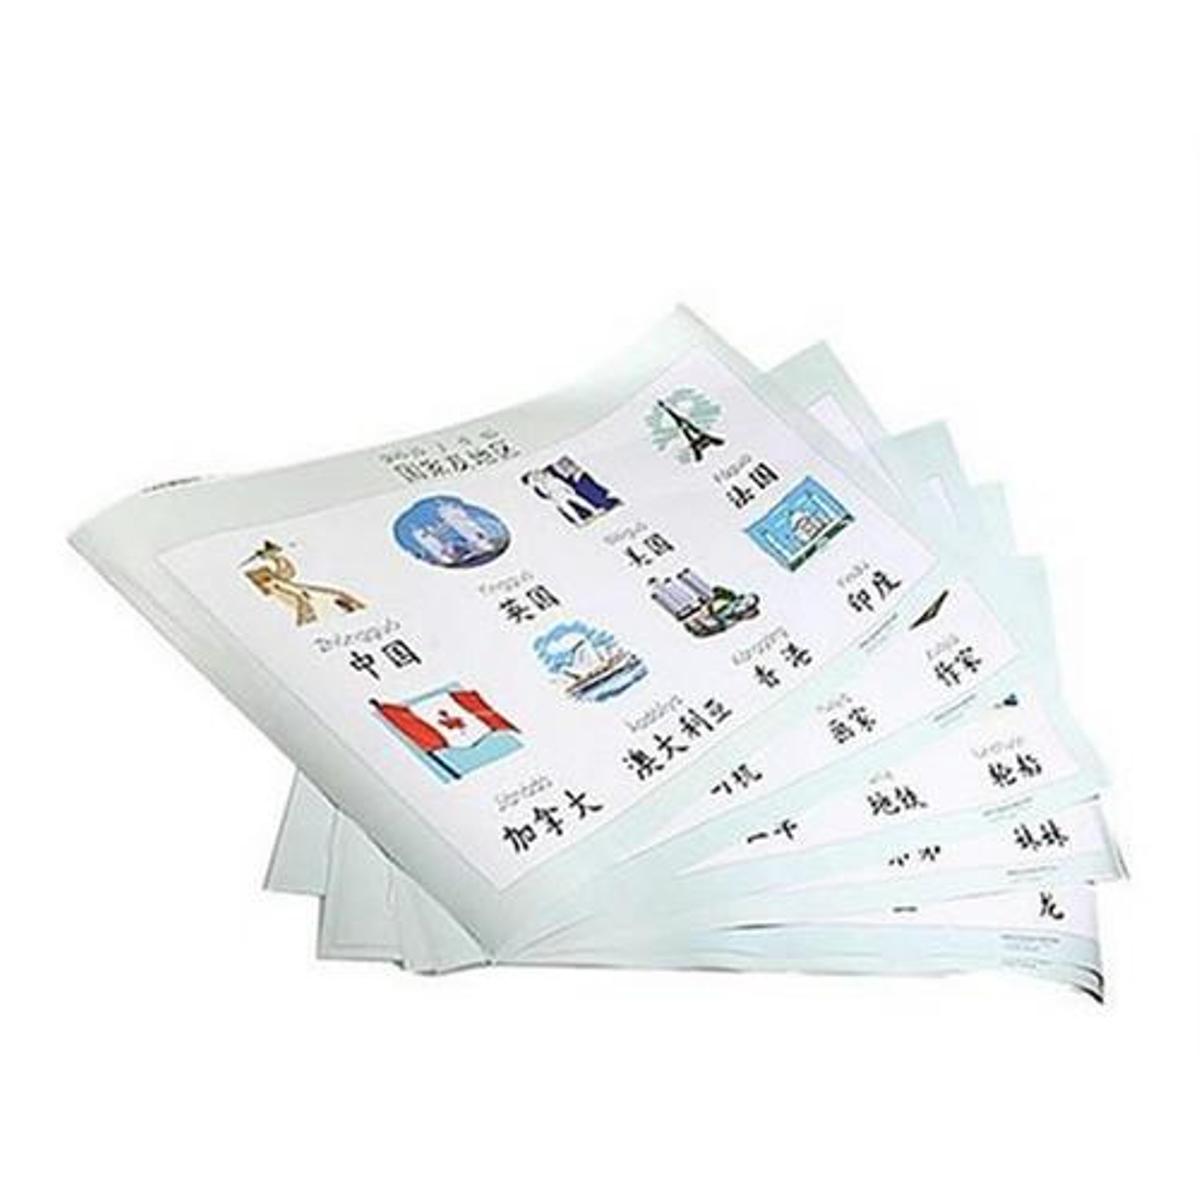 Chinese Character Poster Pack (10 Posters)